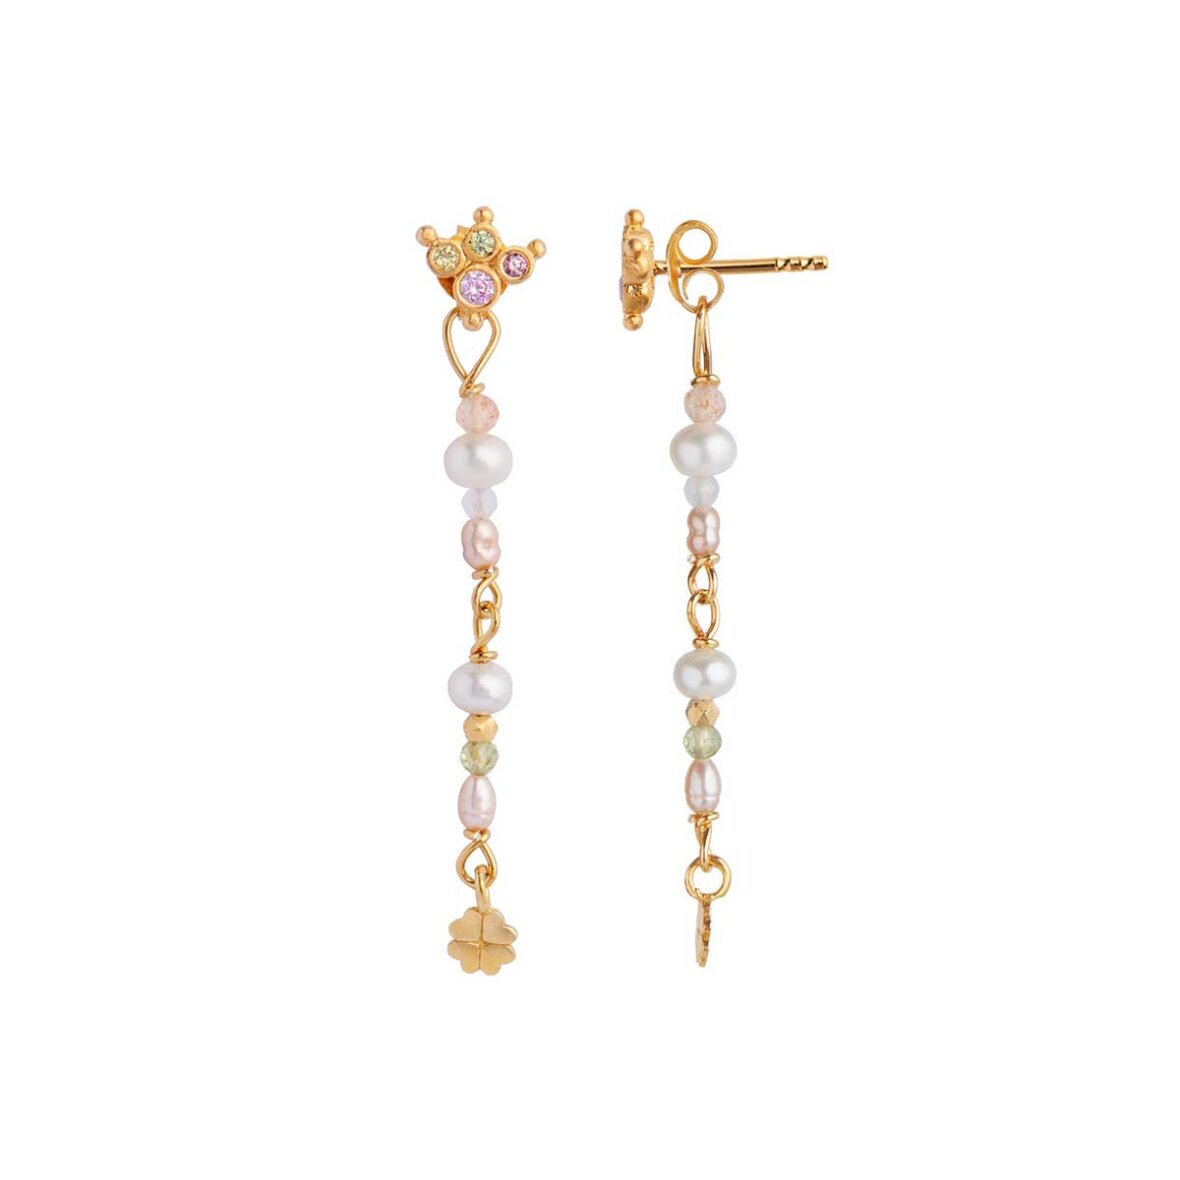 Petit stones and cloves behind ear earring